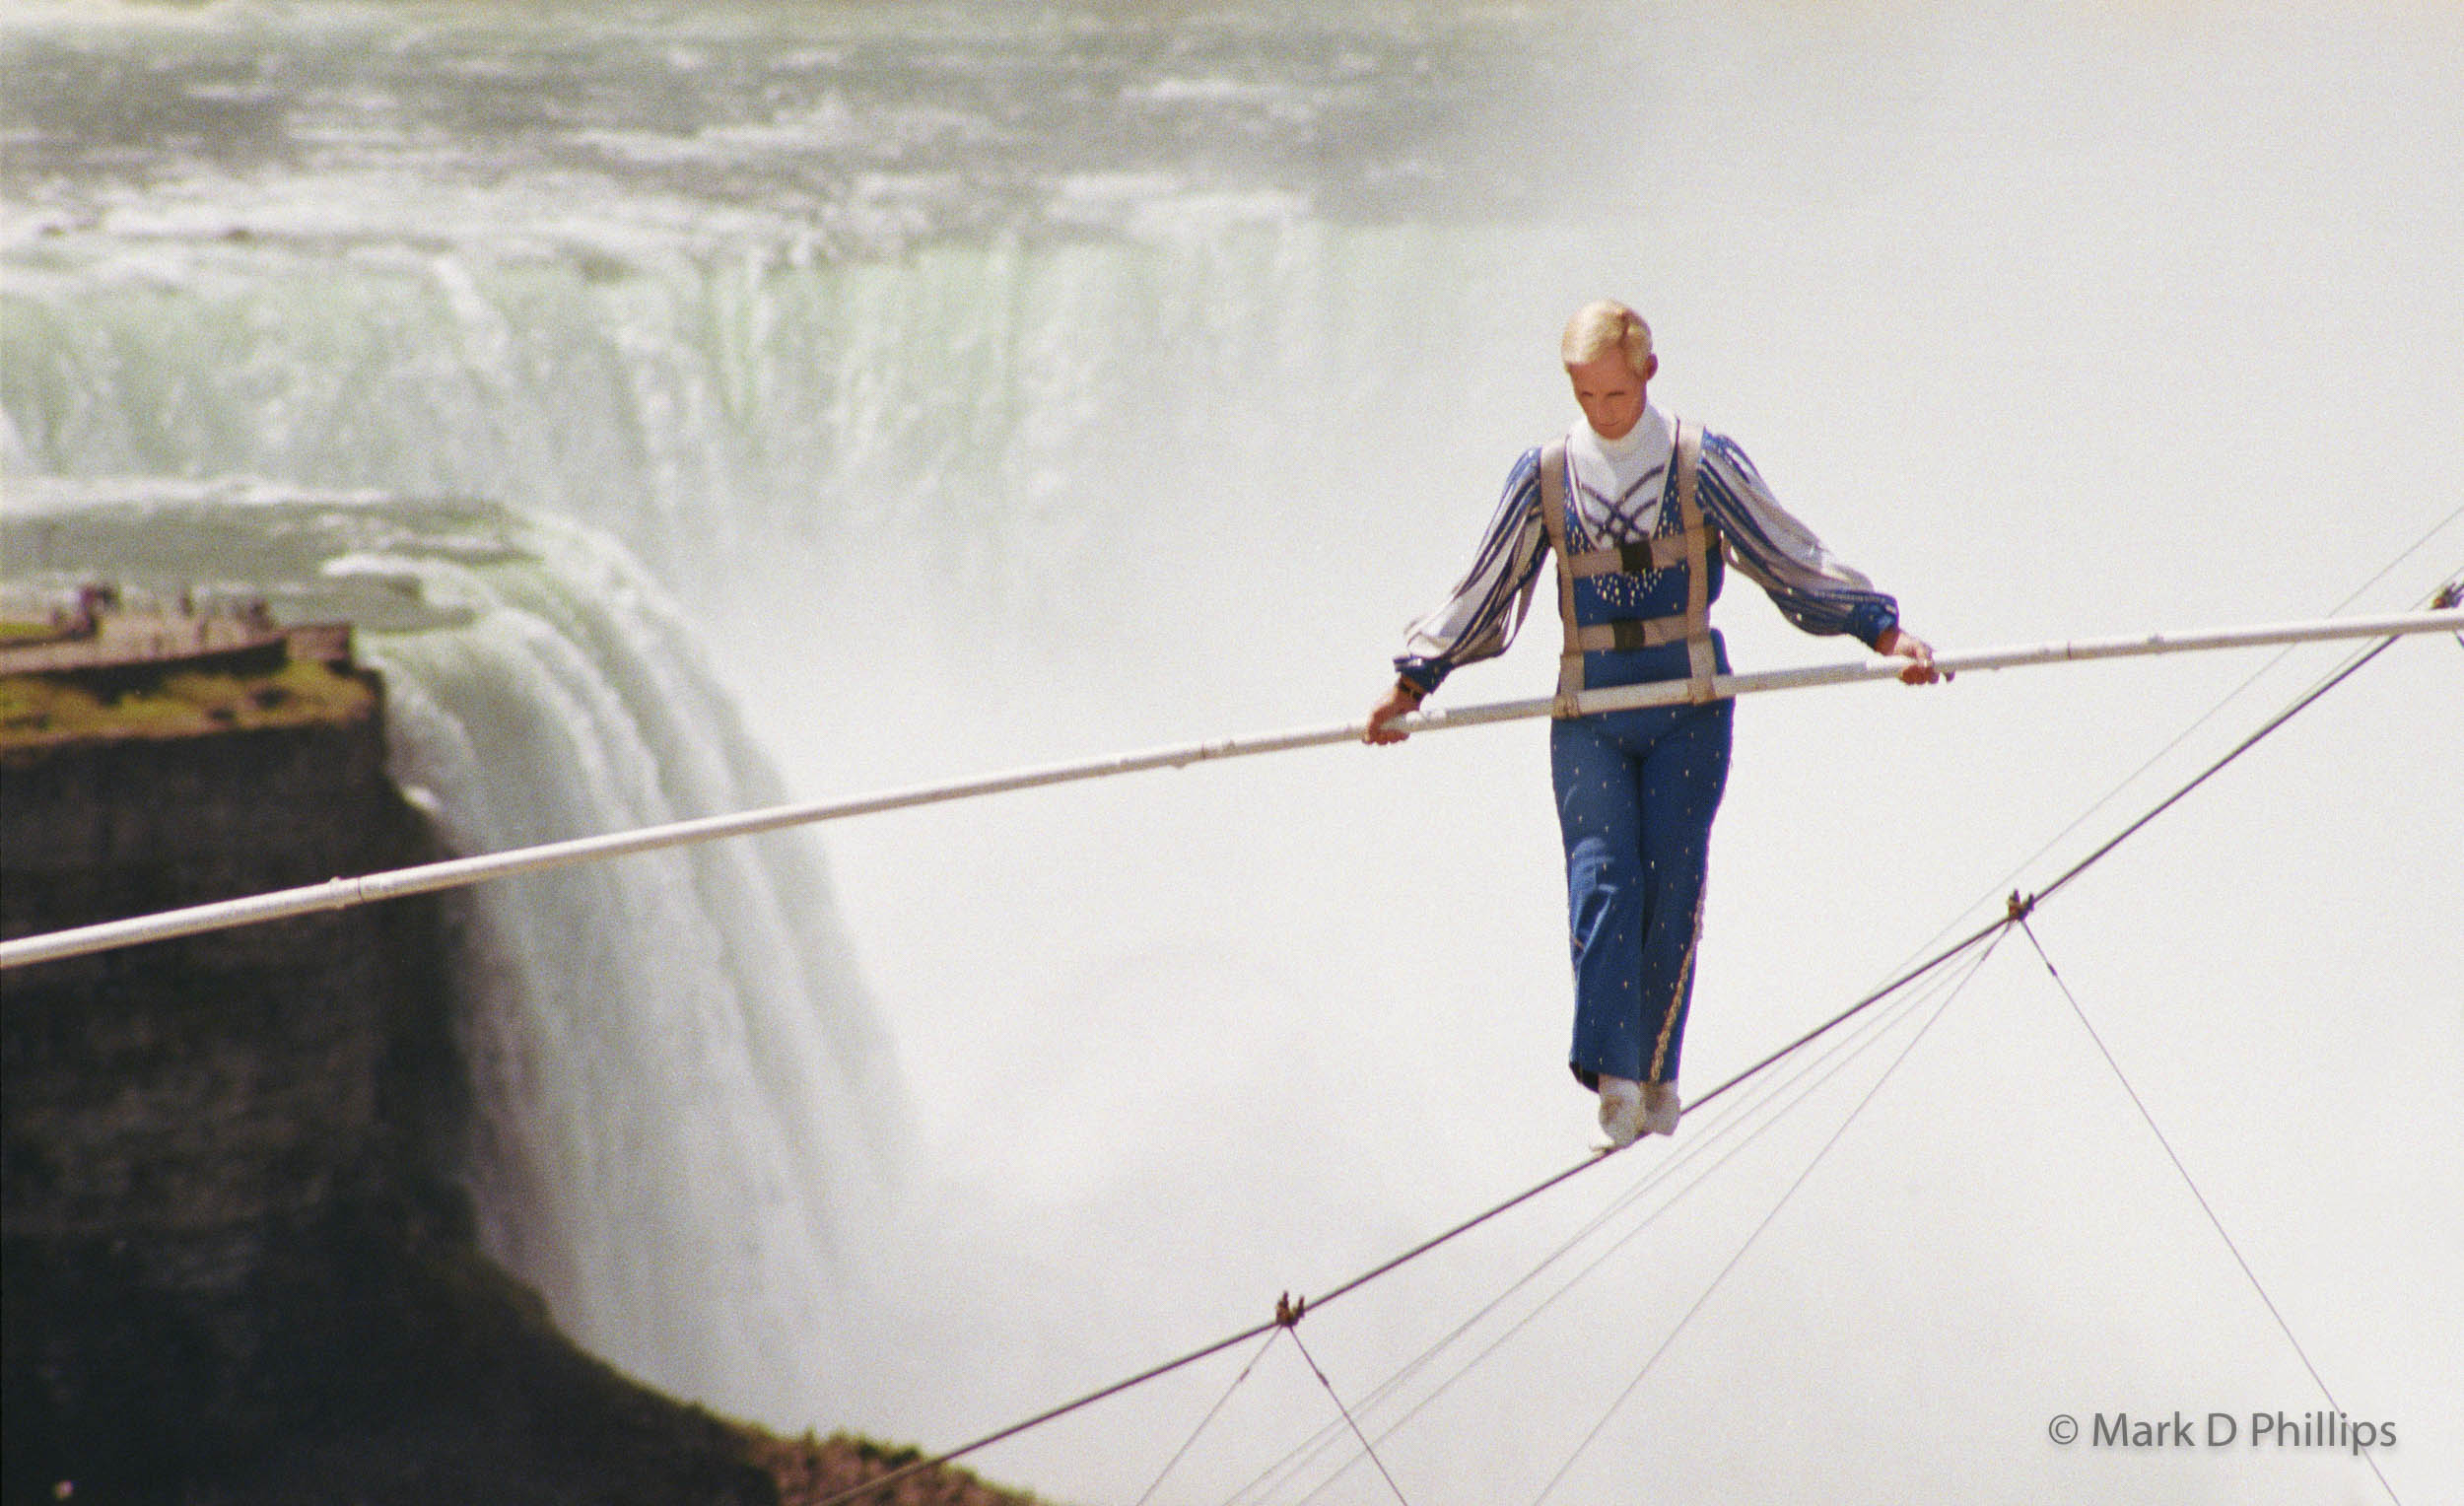 Jay Cochrane skywalks on Clifton Hill in Niagara, Canada, in 2002. The first skywalk in over a hundred years went from the pinnacle of the Sheraton on the Falls Hotel to the Casino Niagara Tower at a height of 40 stories, with Niagara Falls as the backdrop. "Skywalk at Niagara" was the highest skywalk ever completed in Niagara Falls. ©Mark D Phillips